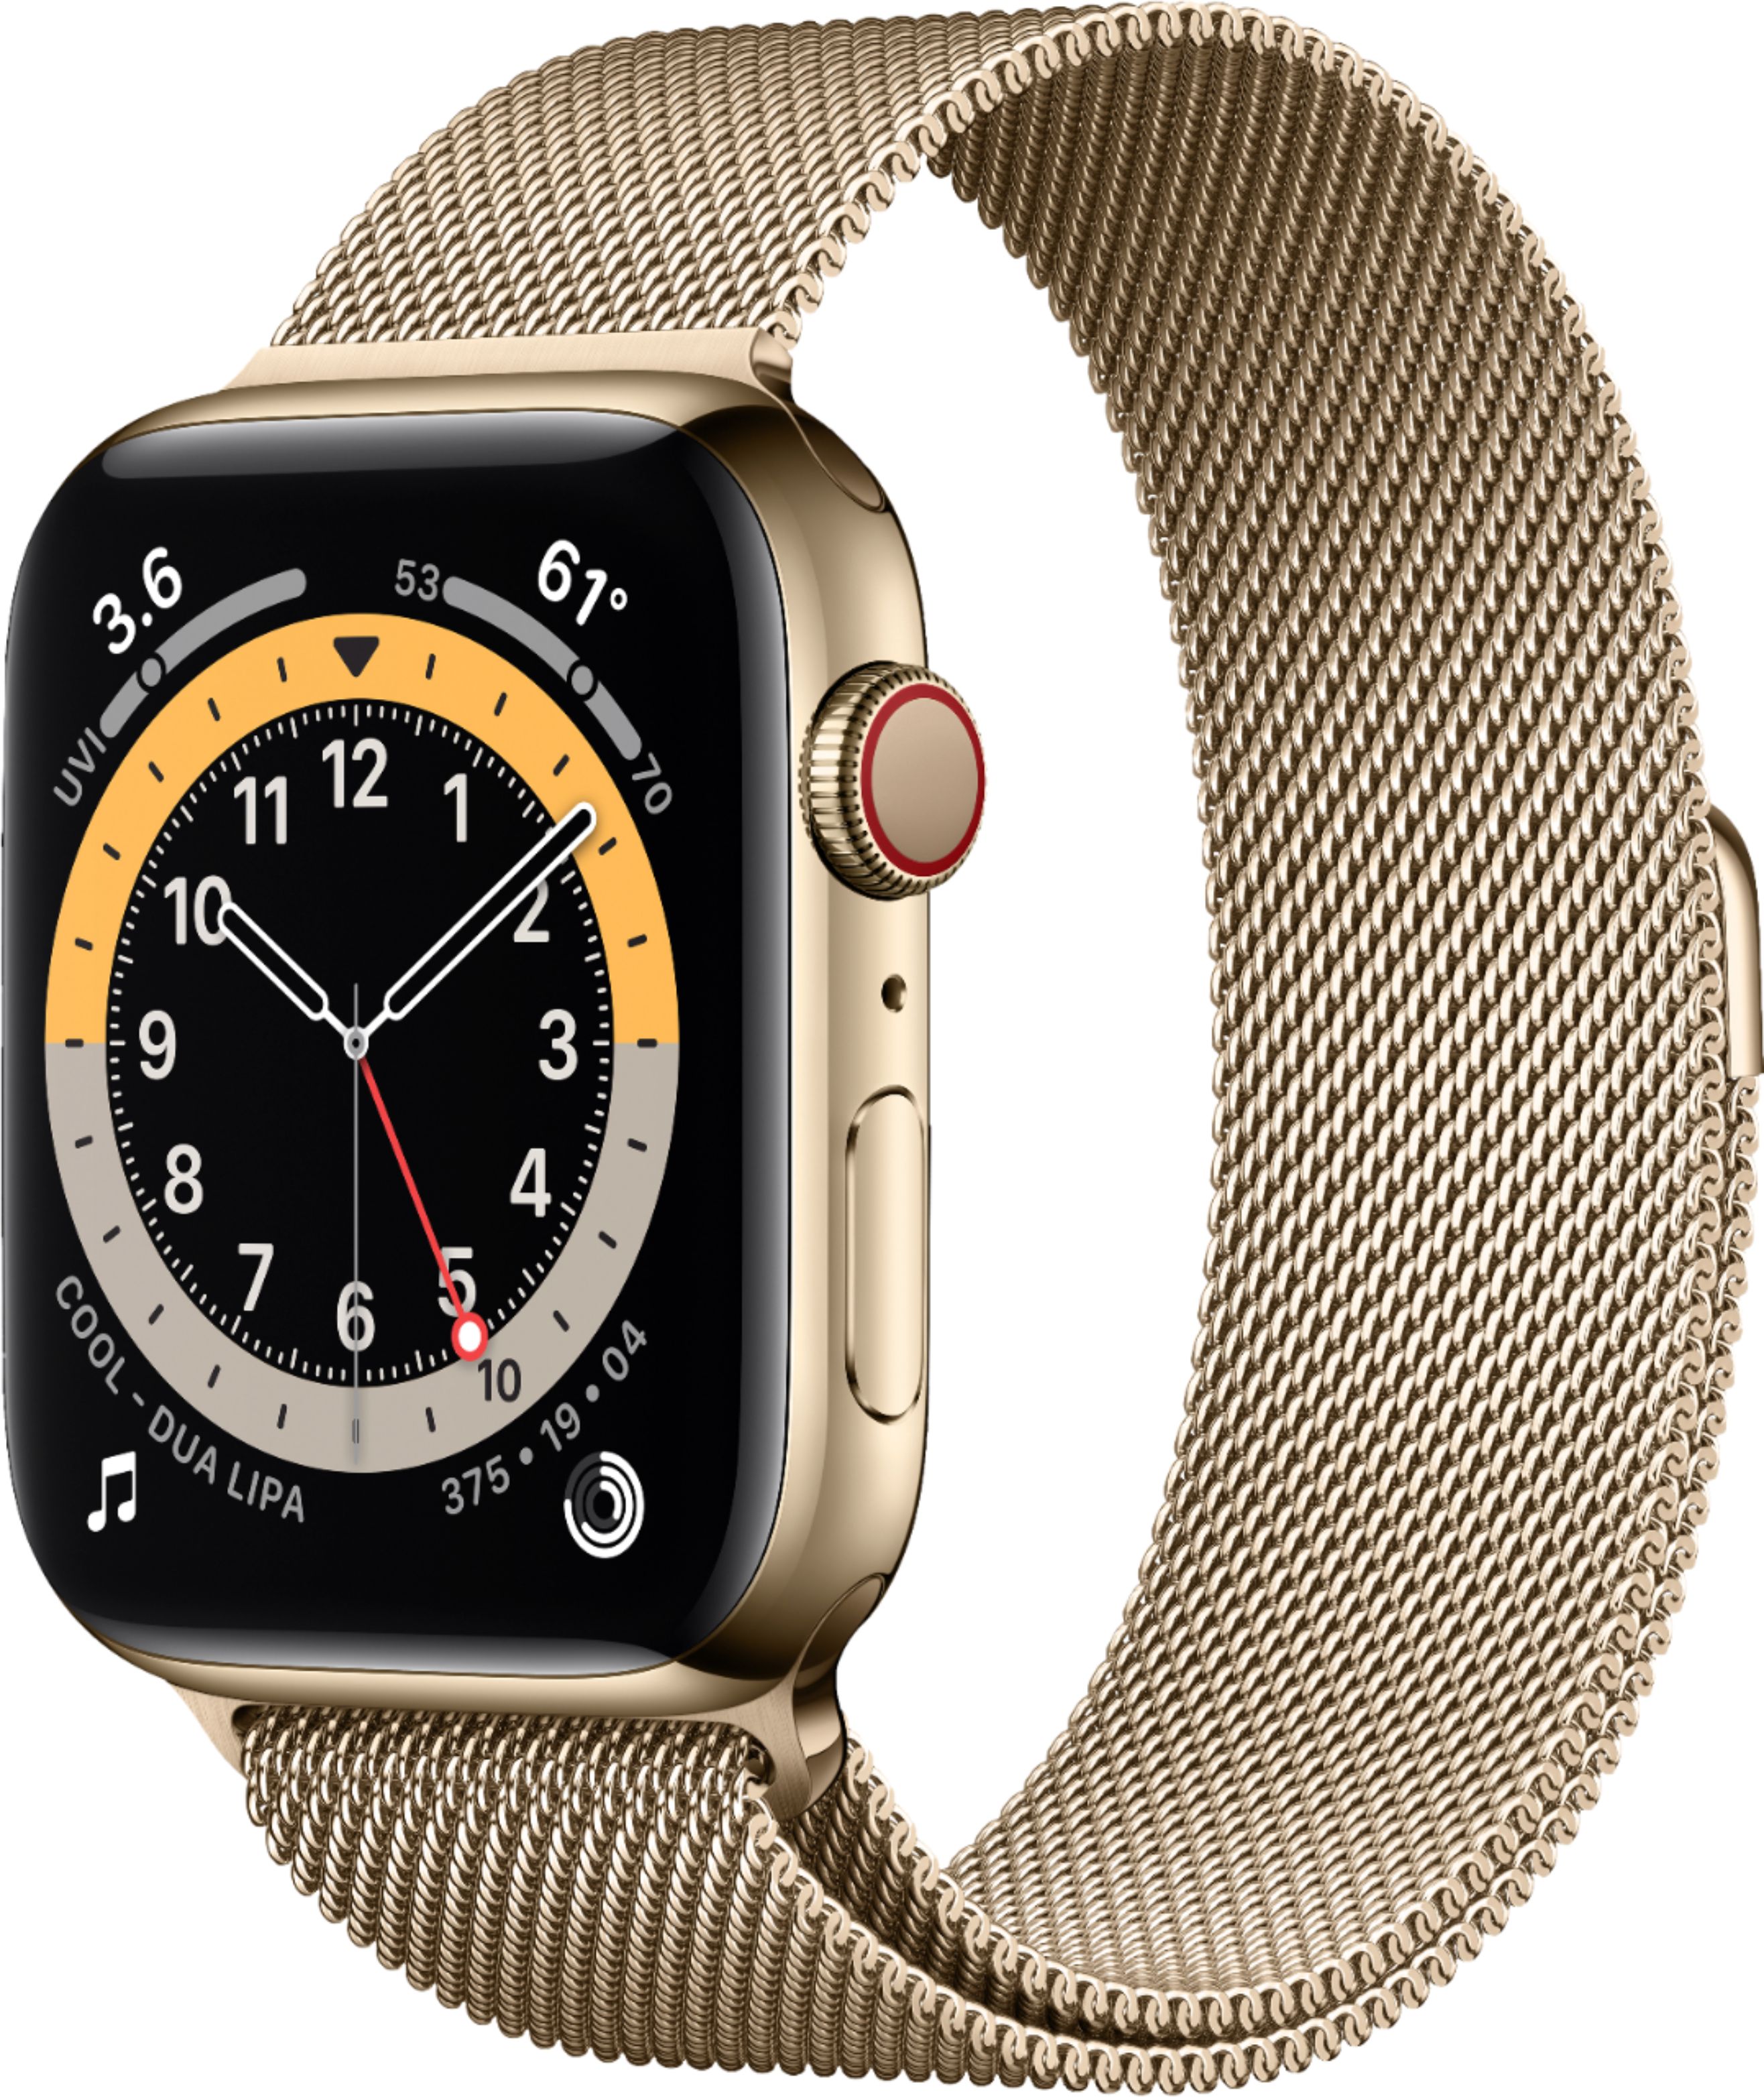 Best Buy: Apple Watch Series 6 (GPS + Cellular) 44mm Stainless